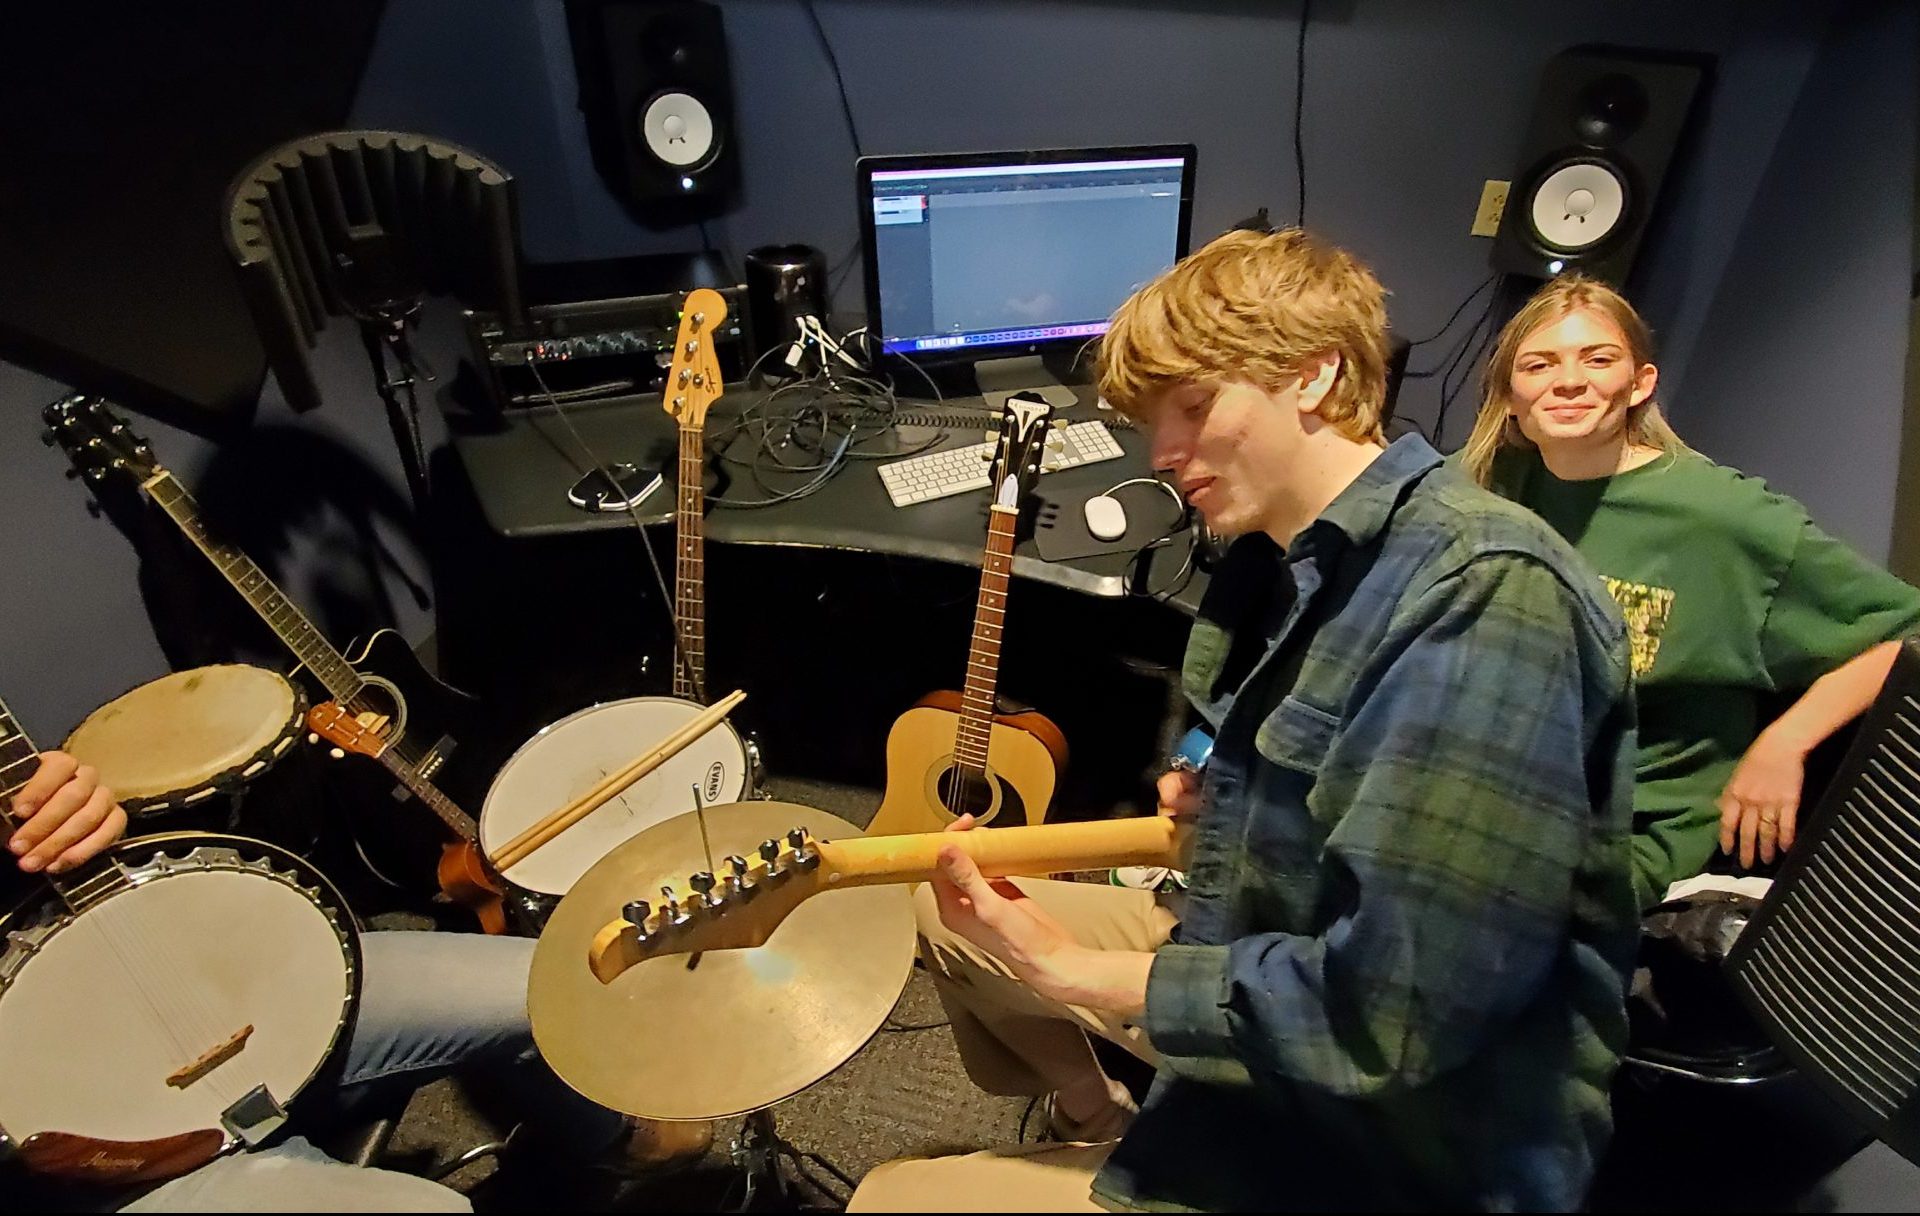 Phoenix is seated at the center of the image holding a guitar. At the left, a student holds a banjo, while another student behind Phoenix looks directly at the camera smiling. The students are seated in an audiovisual lab with a mixing program on a computer behind them.